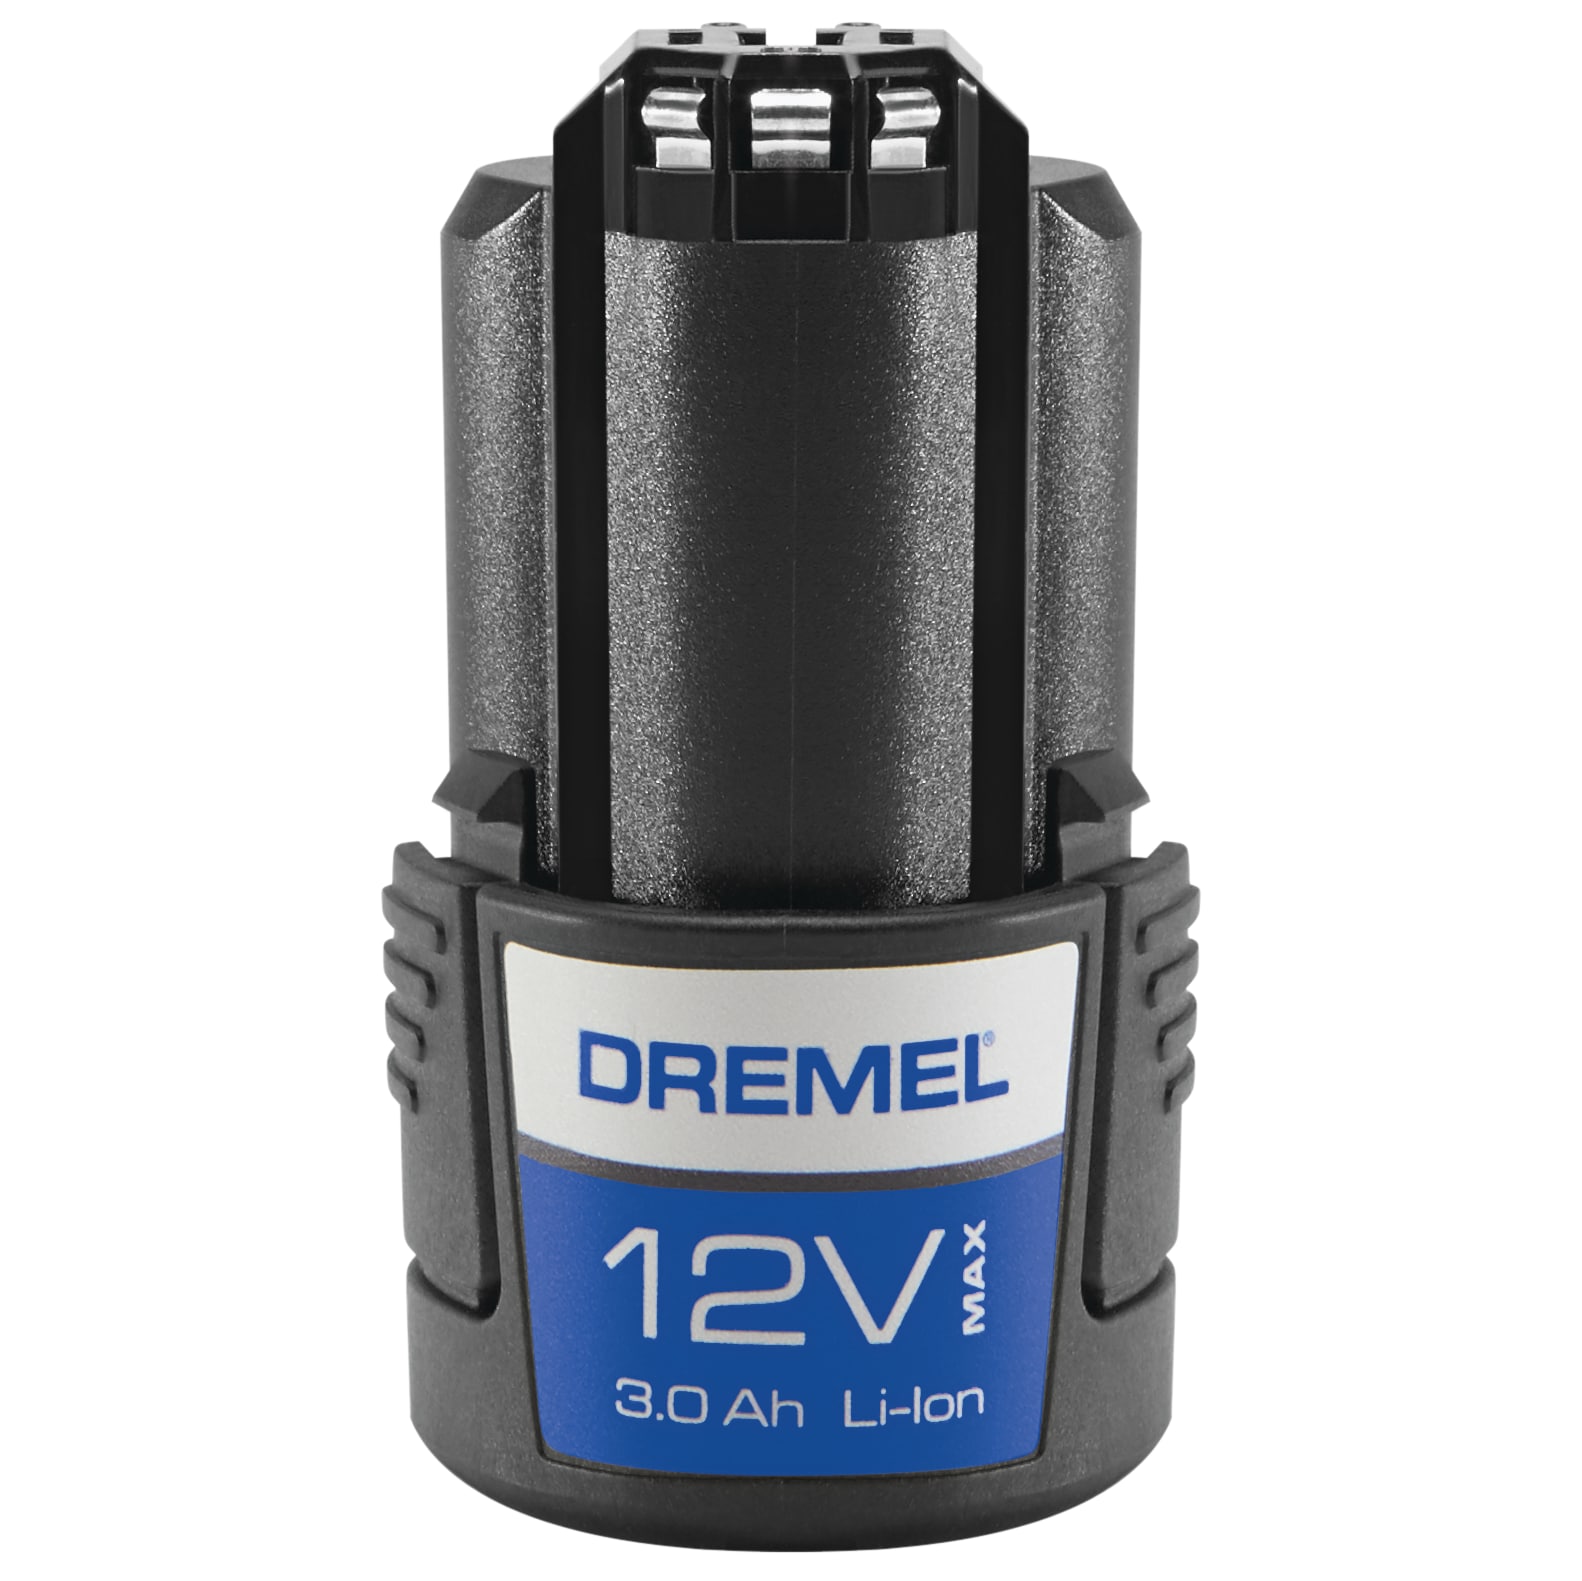 Dremel 8260 rotary tool connects to iPhone and Android via